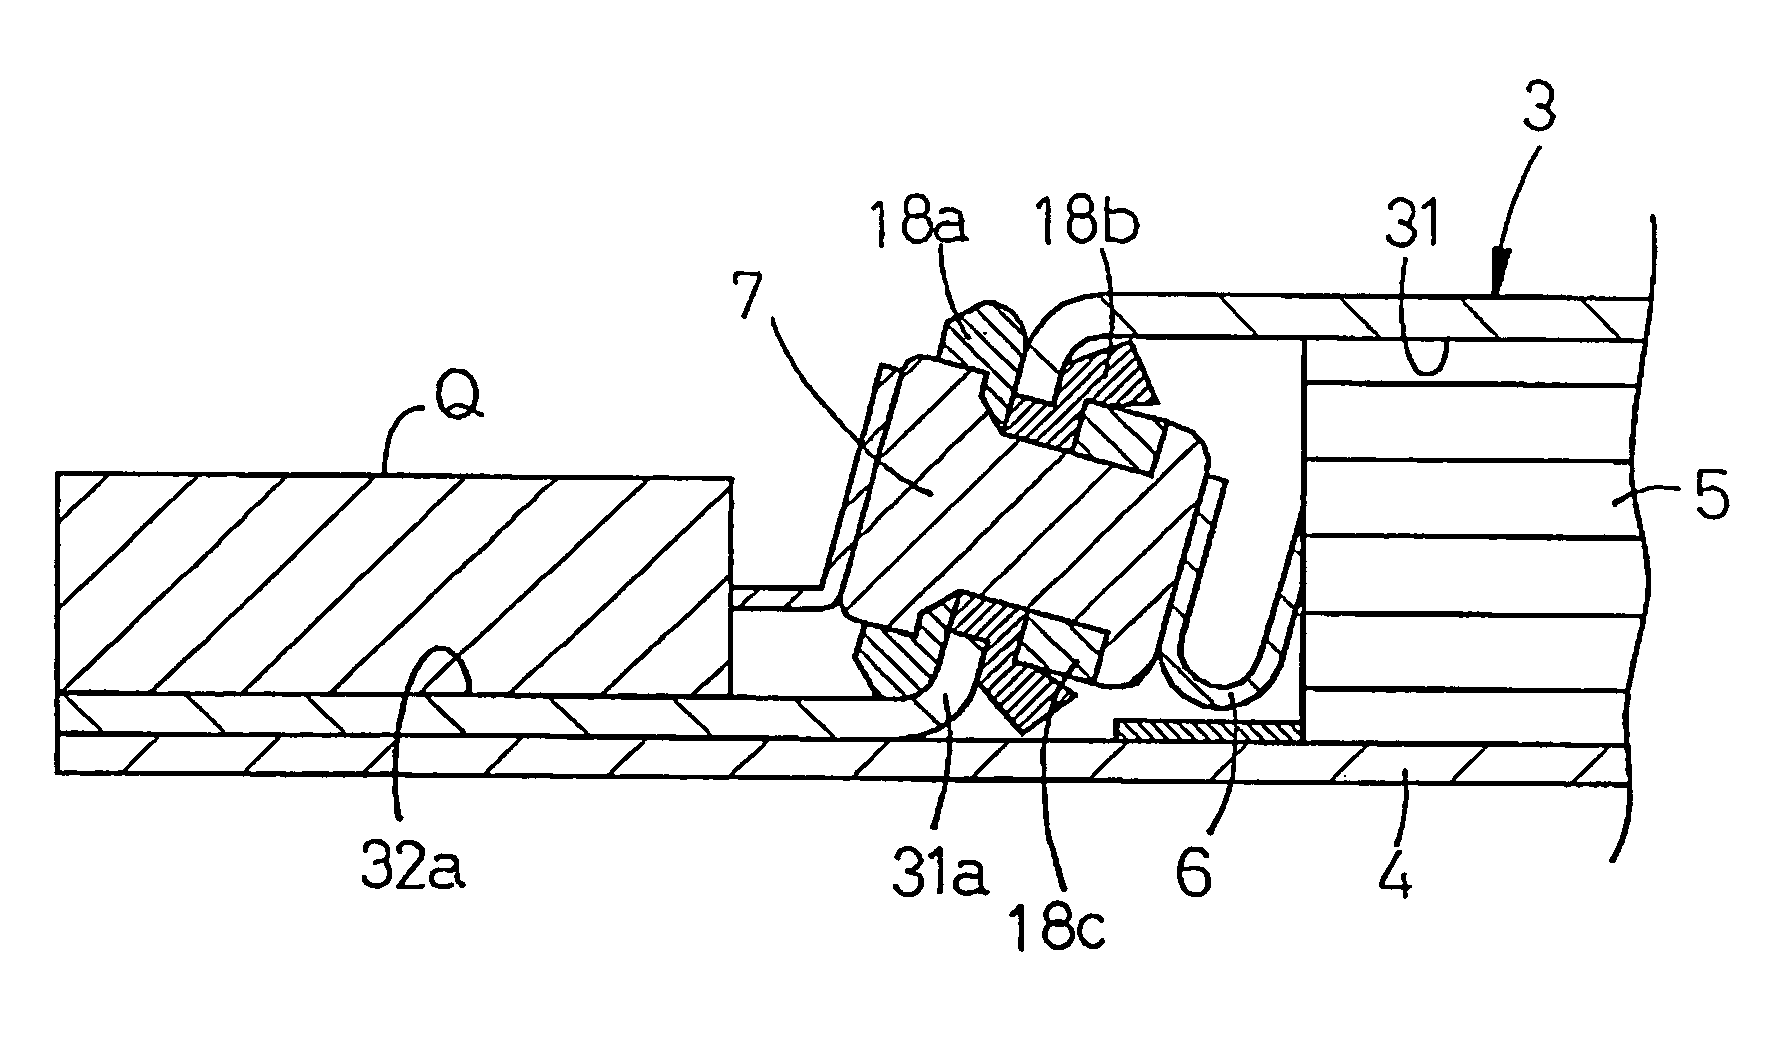 Battery comprising a flange formed at a peripheral edge and a protection circuit attached to the flange